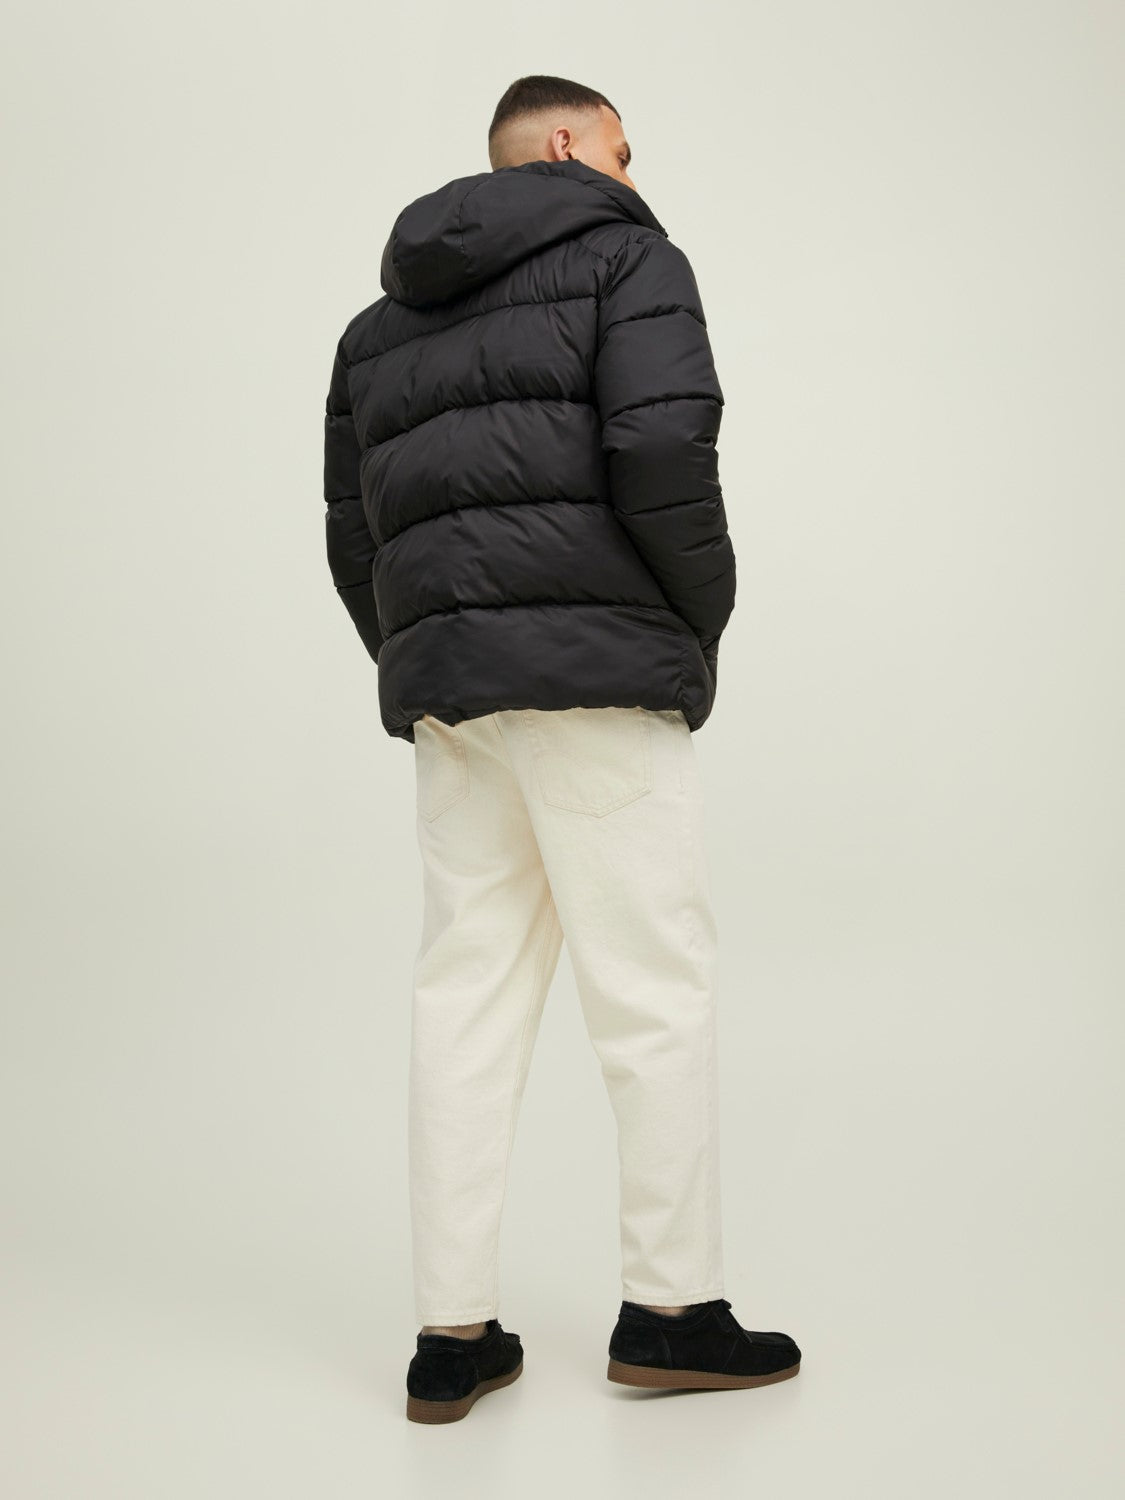 Slope Hooded Puffer Black Jacket-Bacl view